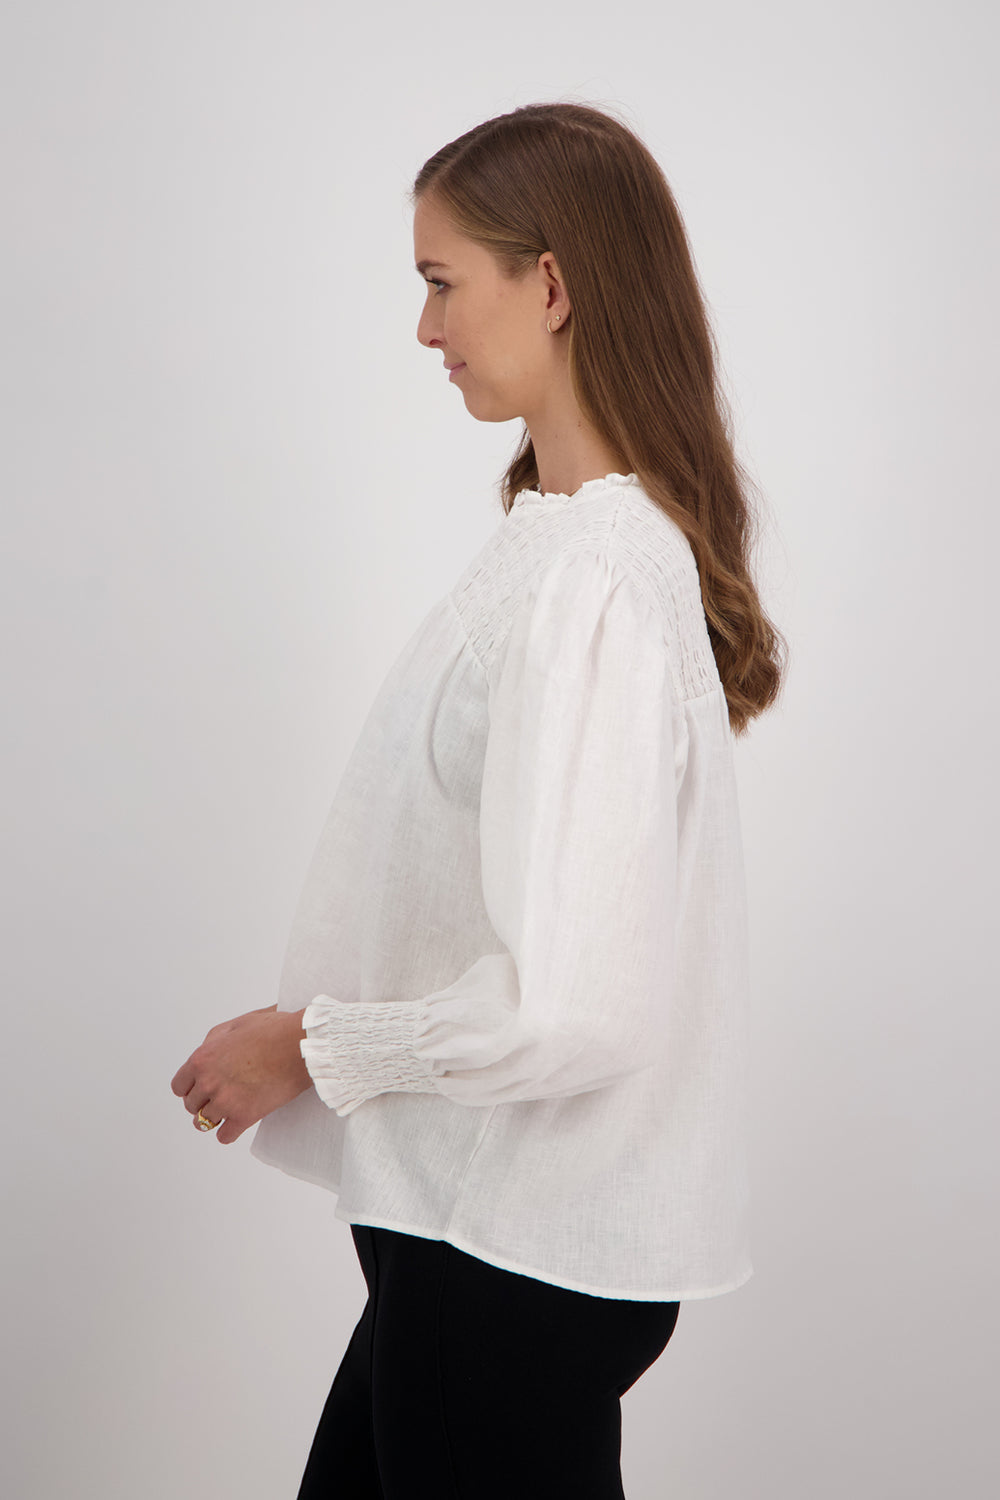 Briarwood Claire Top - White